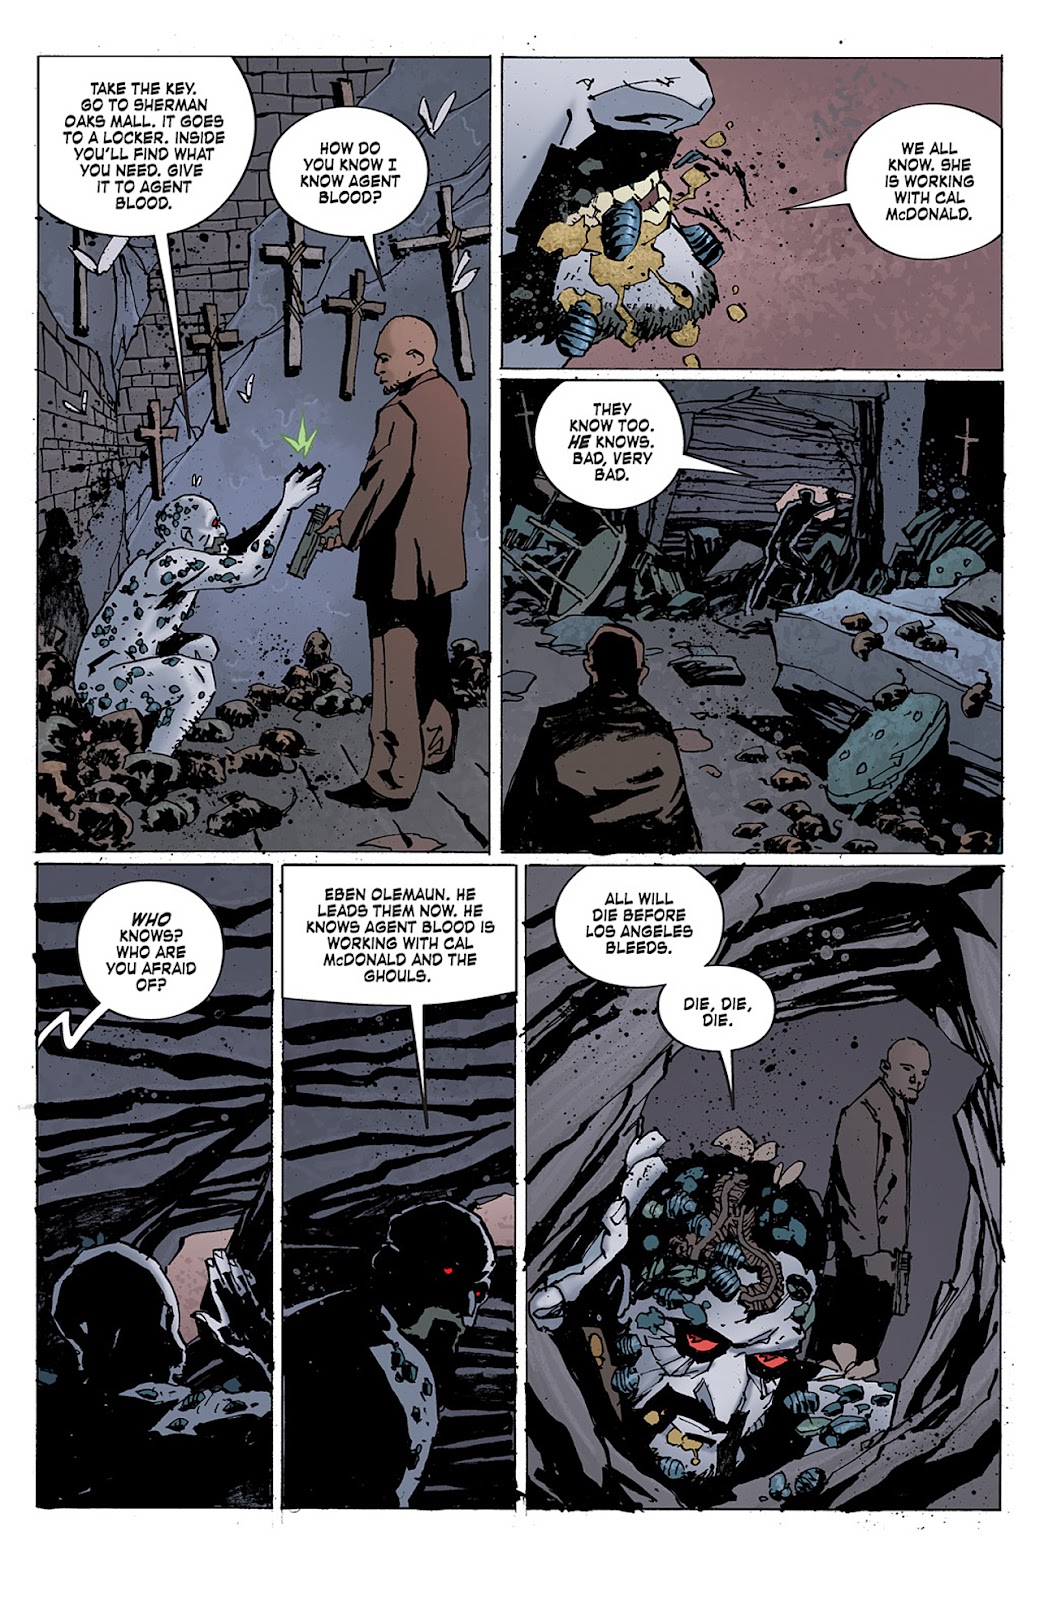 Criminal Macabre: Final Night - The 30 Days of Night Crossover issue 3 - Page 3